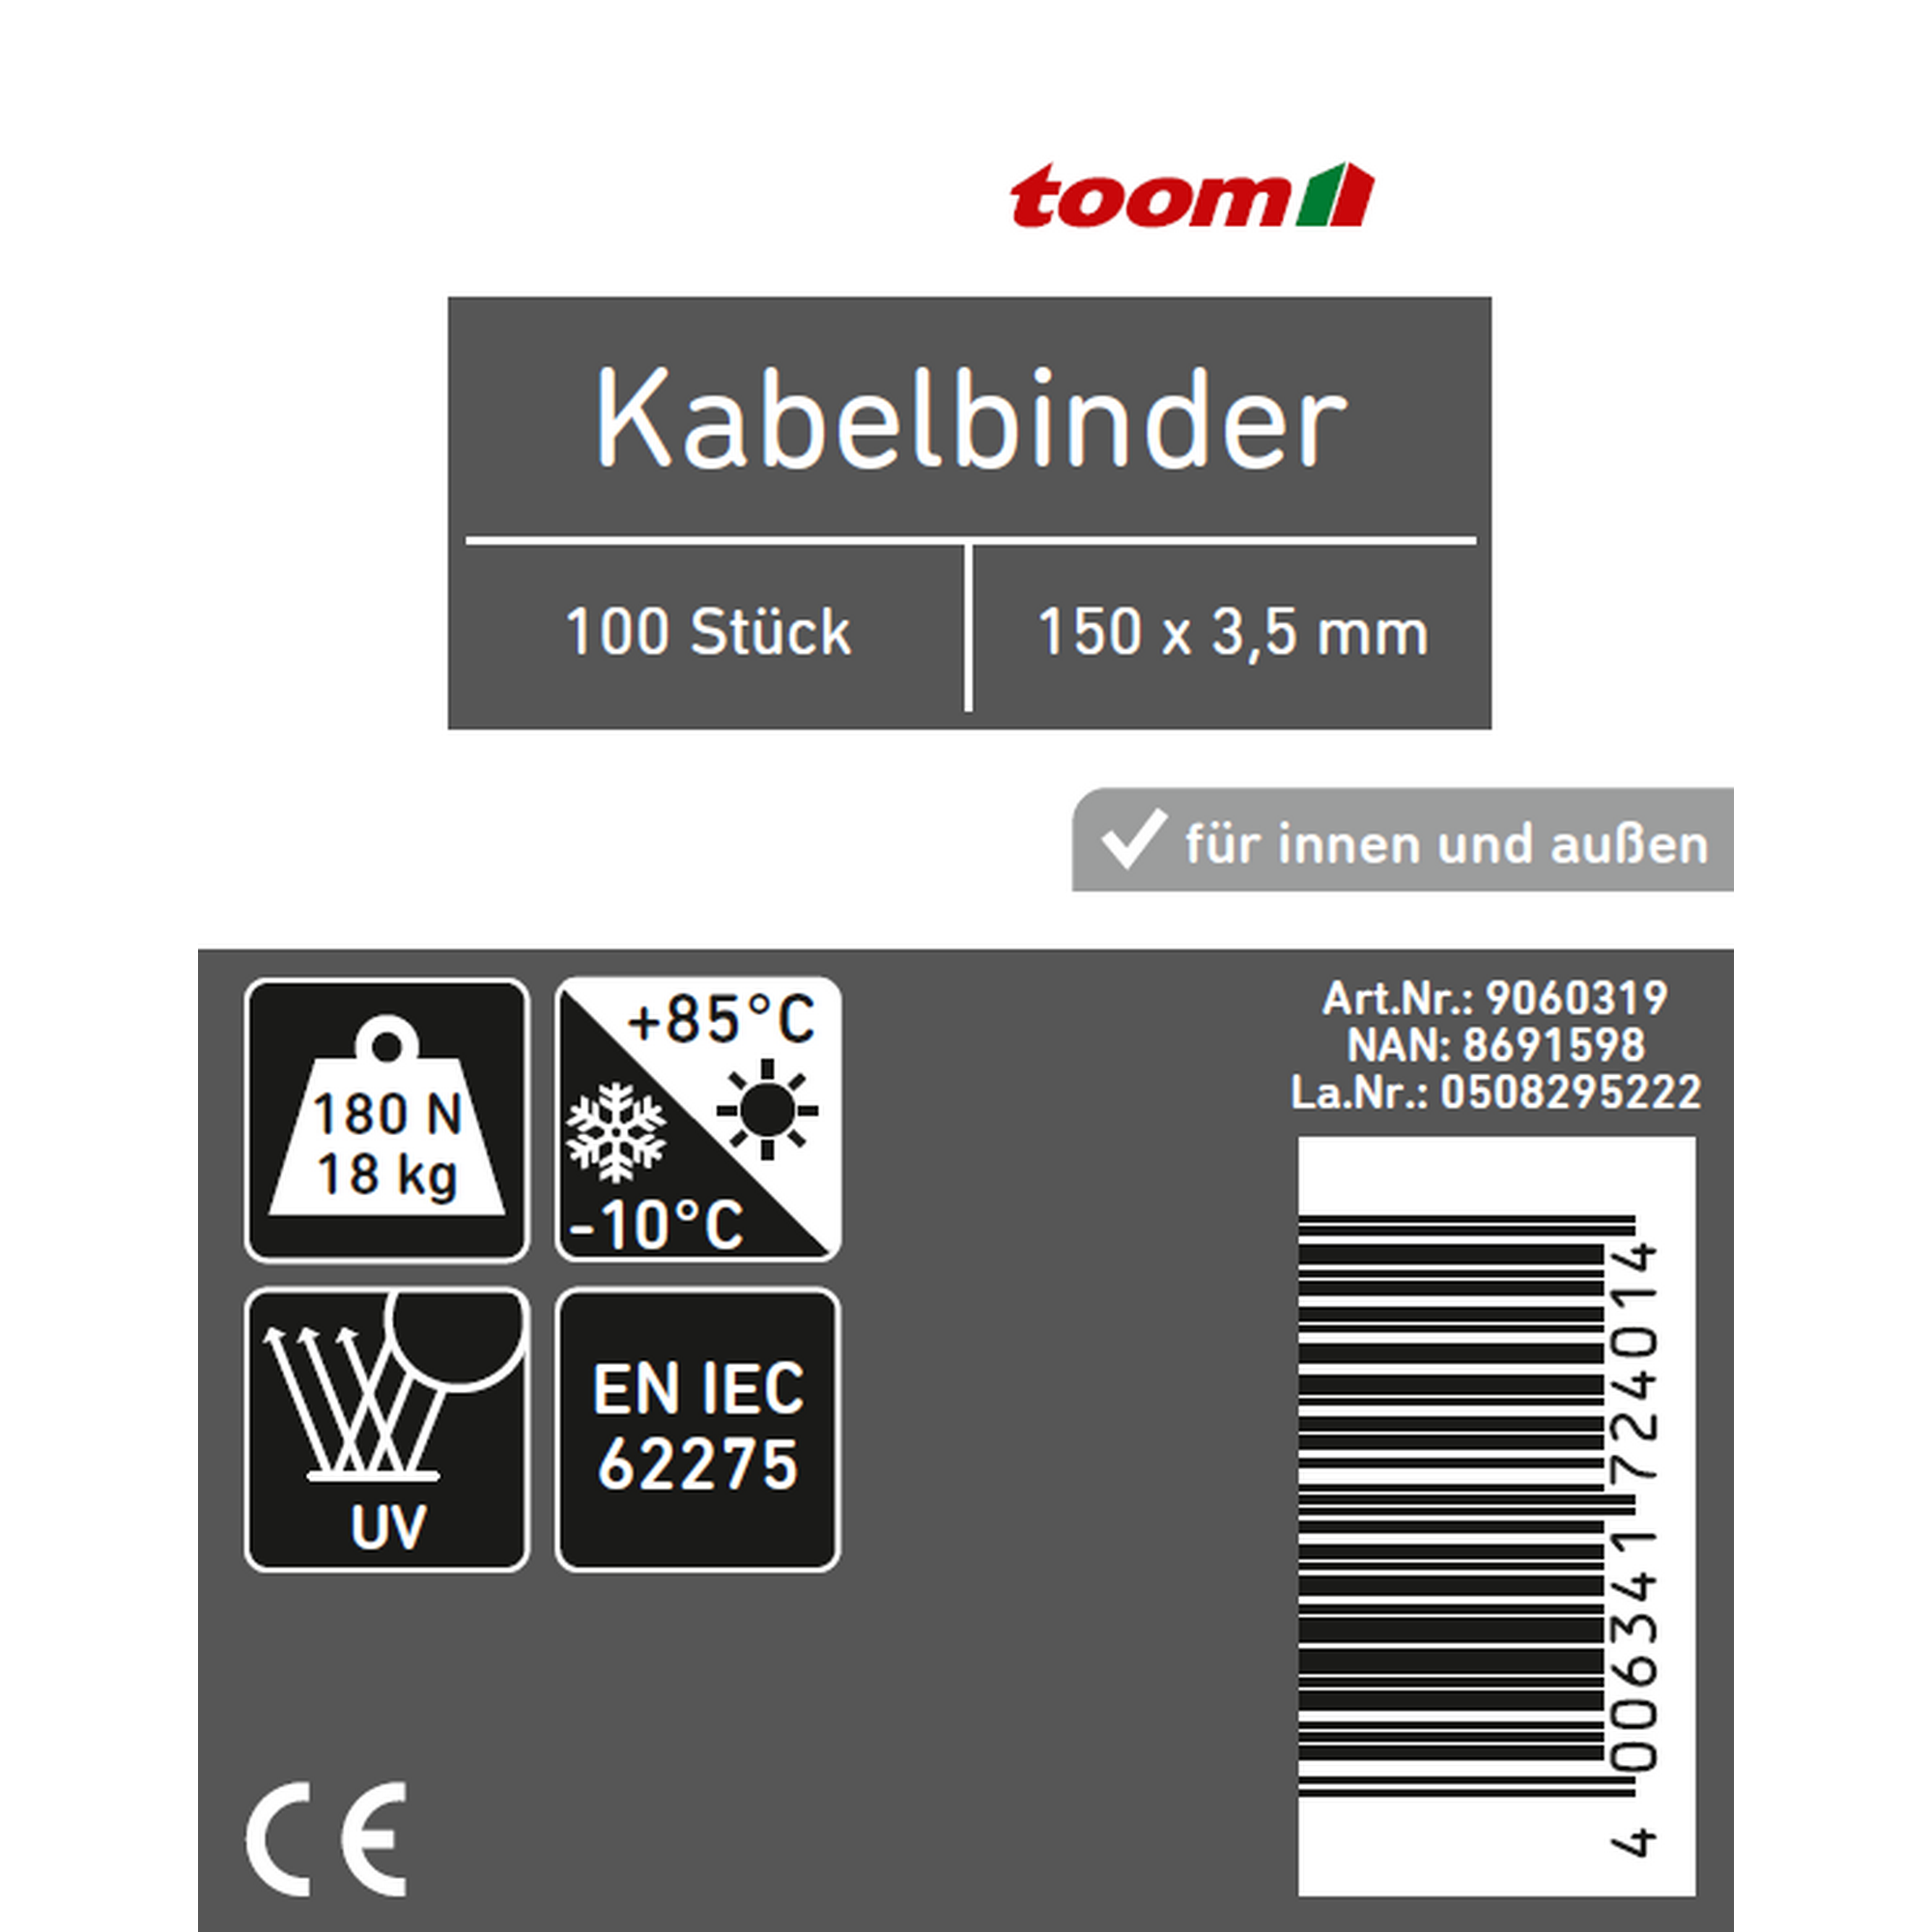 Kabelbinder weiß 3,5 x 150 mm 100 Stück + product picture